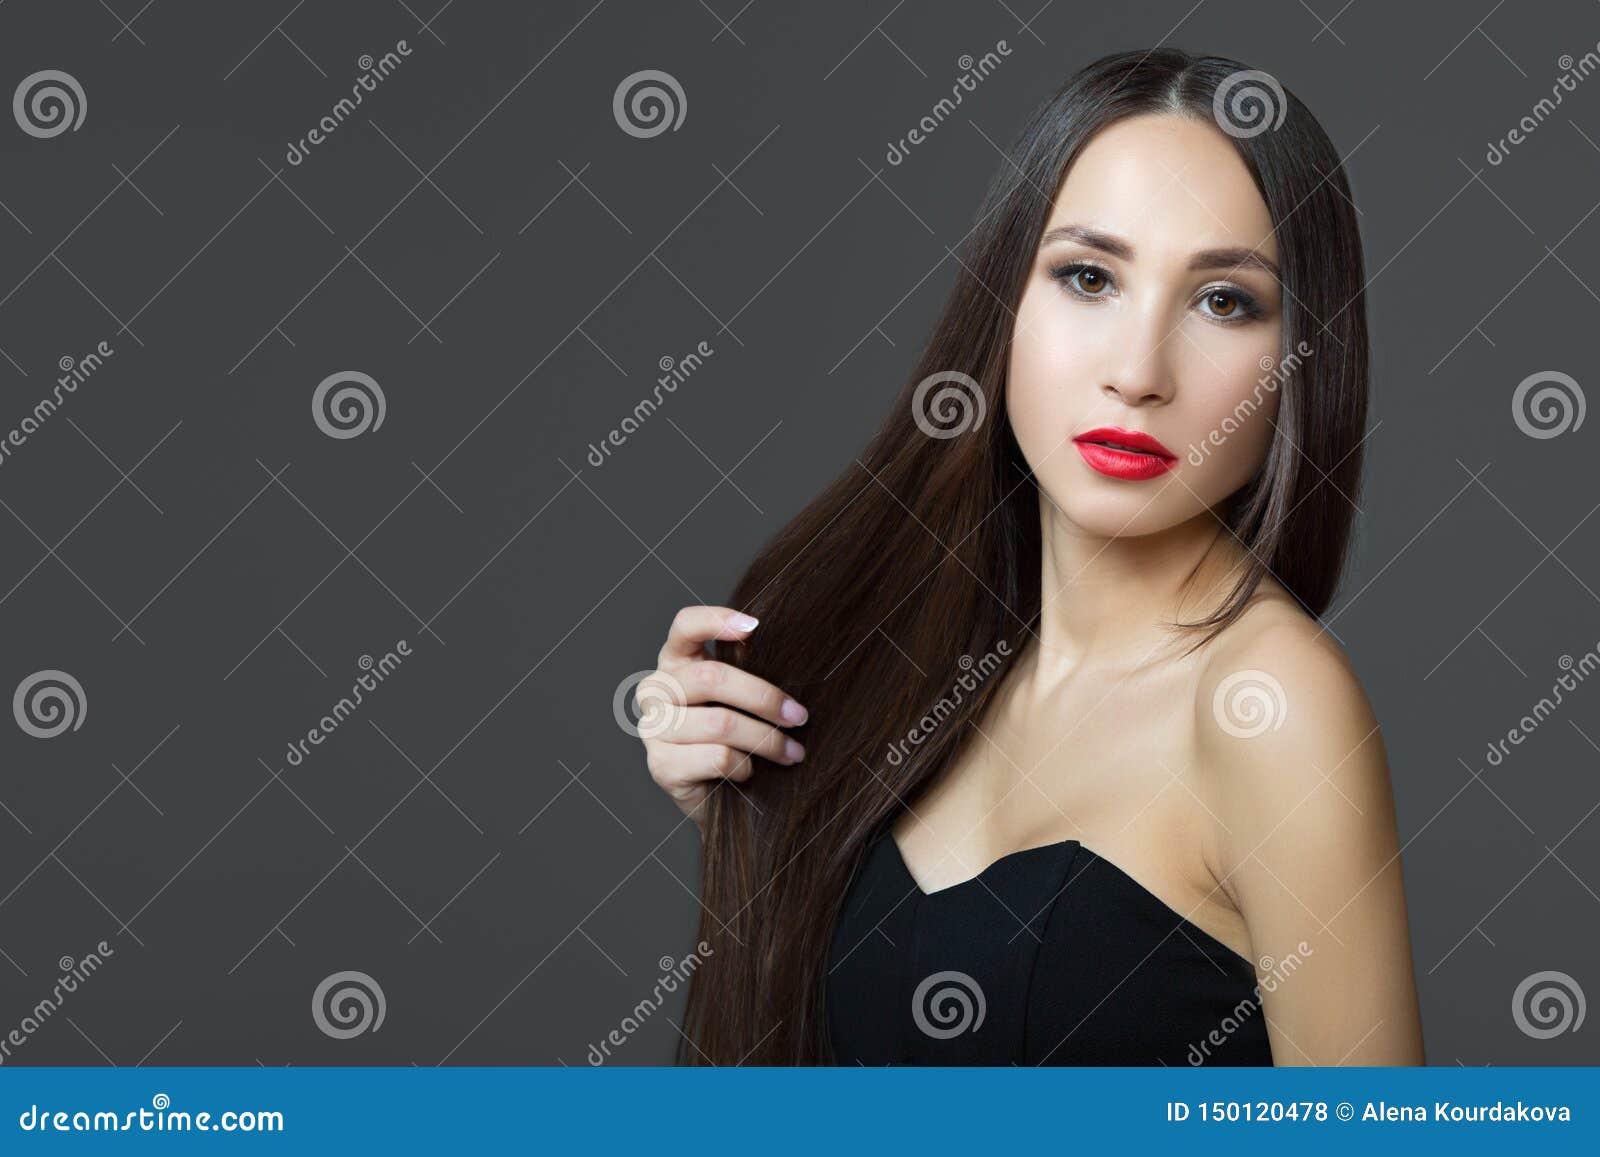 Young Woman With Long Straight Dark Hair Red Lipstick